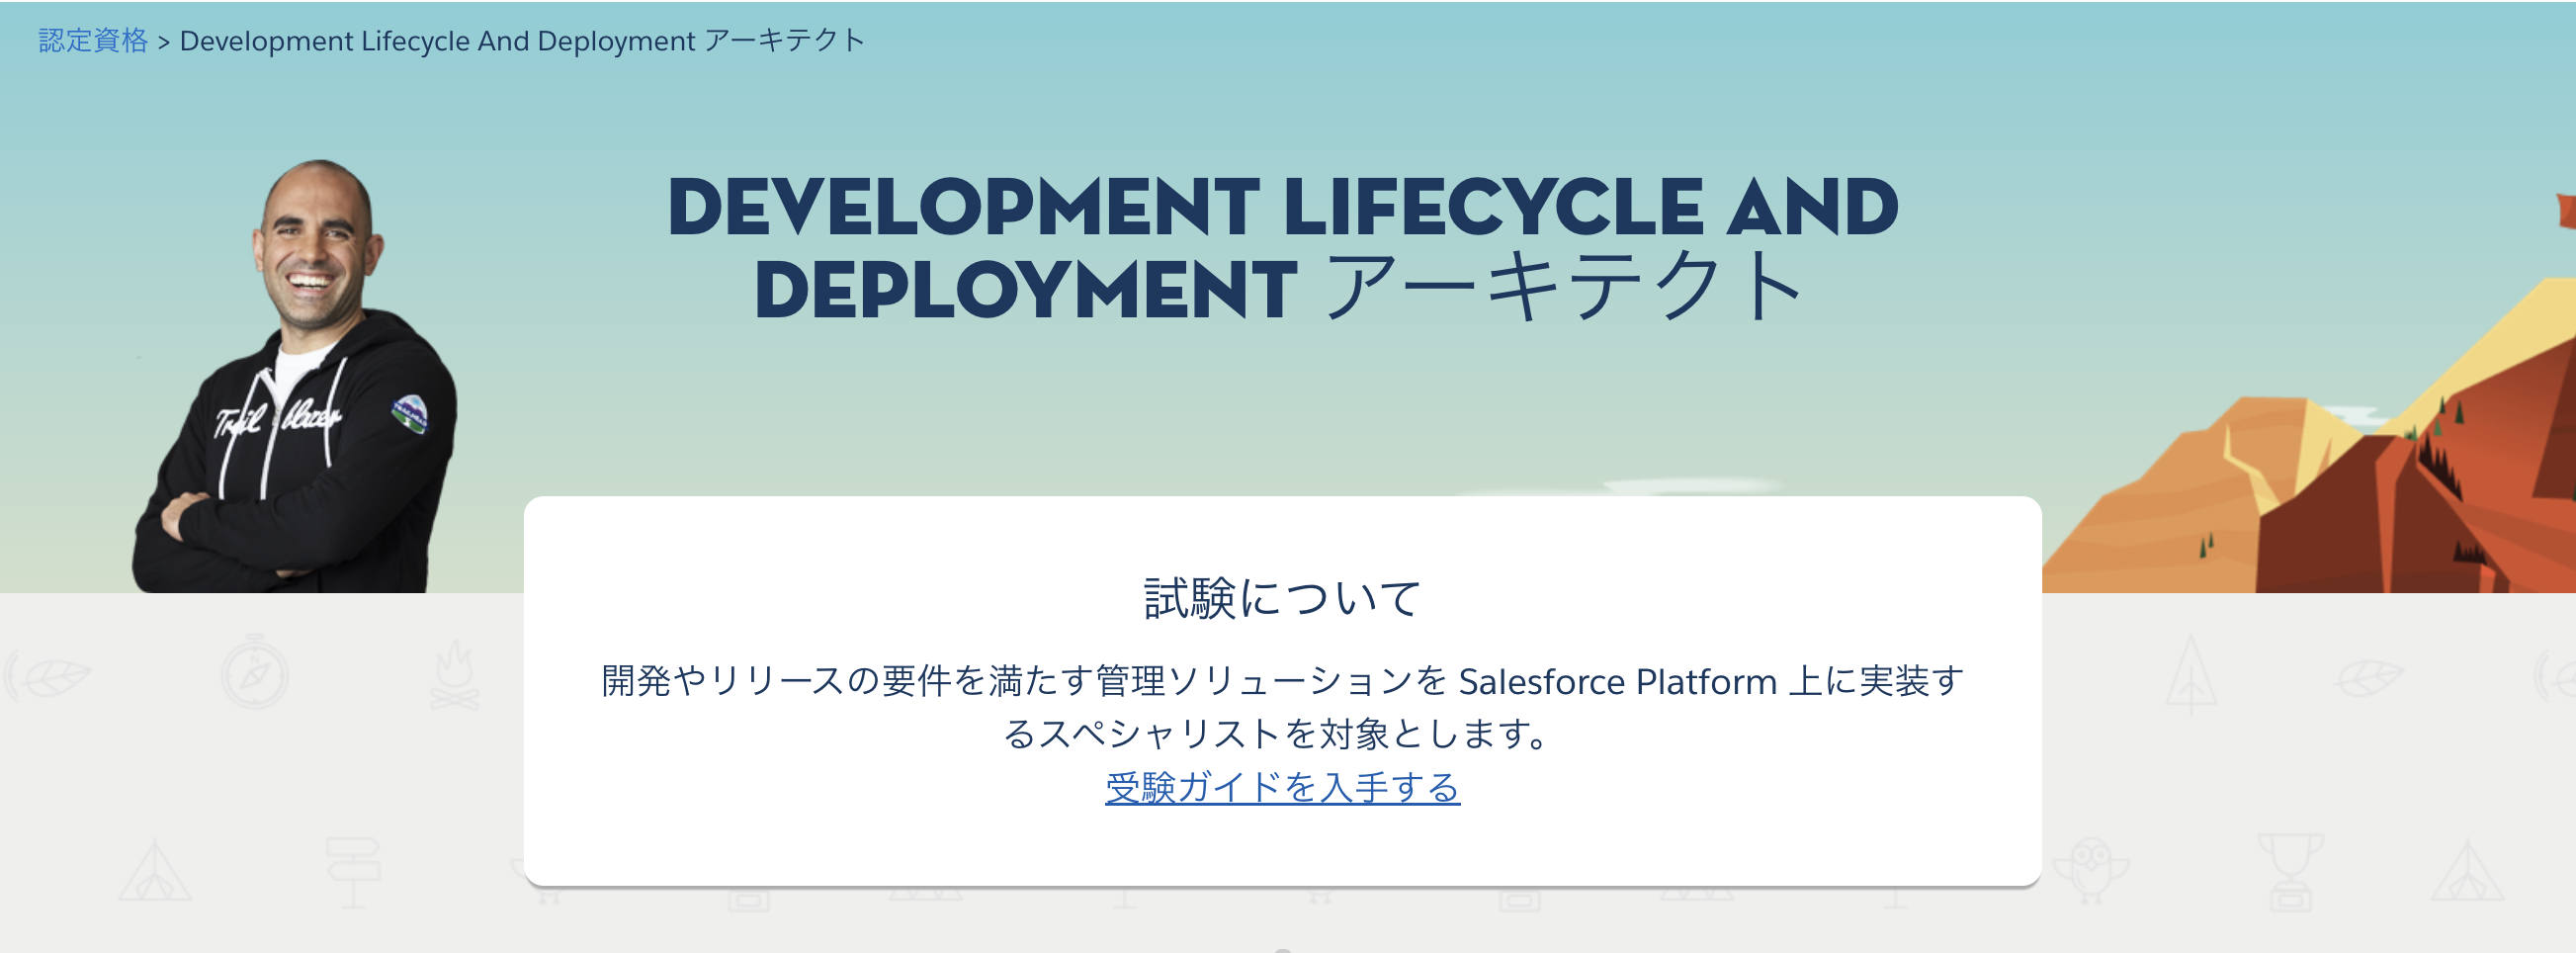 Salesforce 認定 Development Lifecycle and Deployment アーキテクト